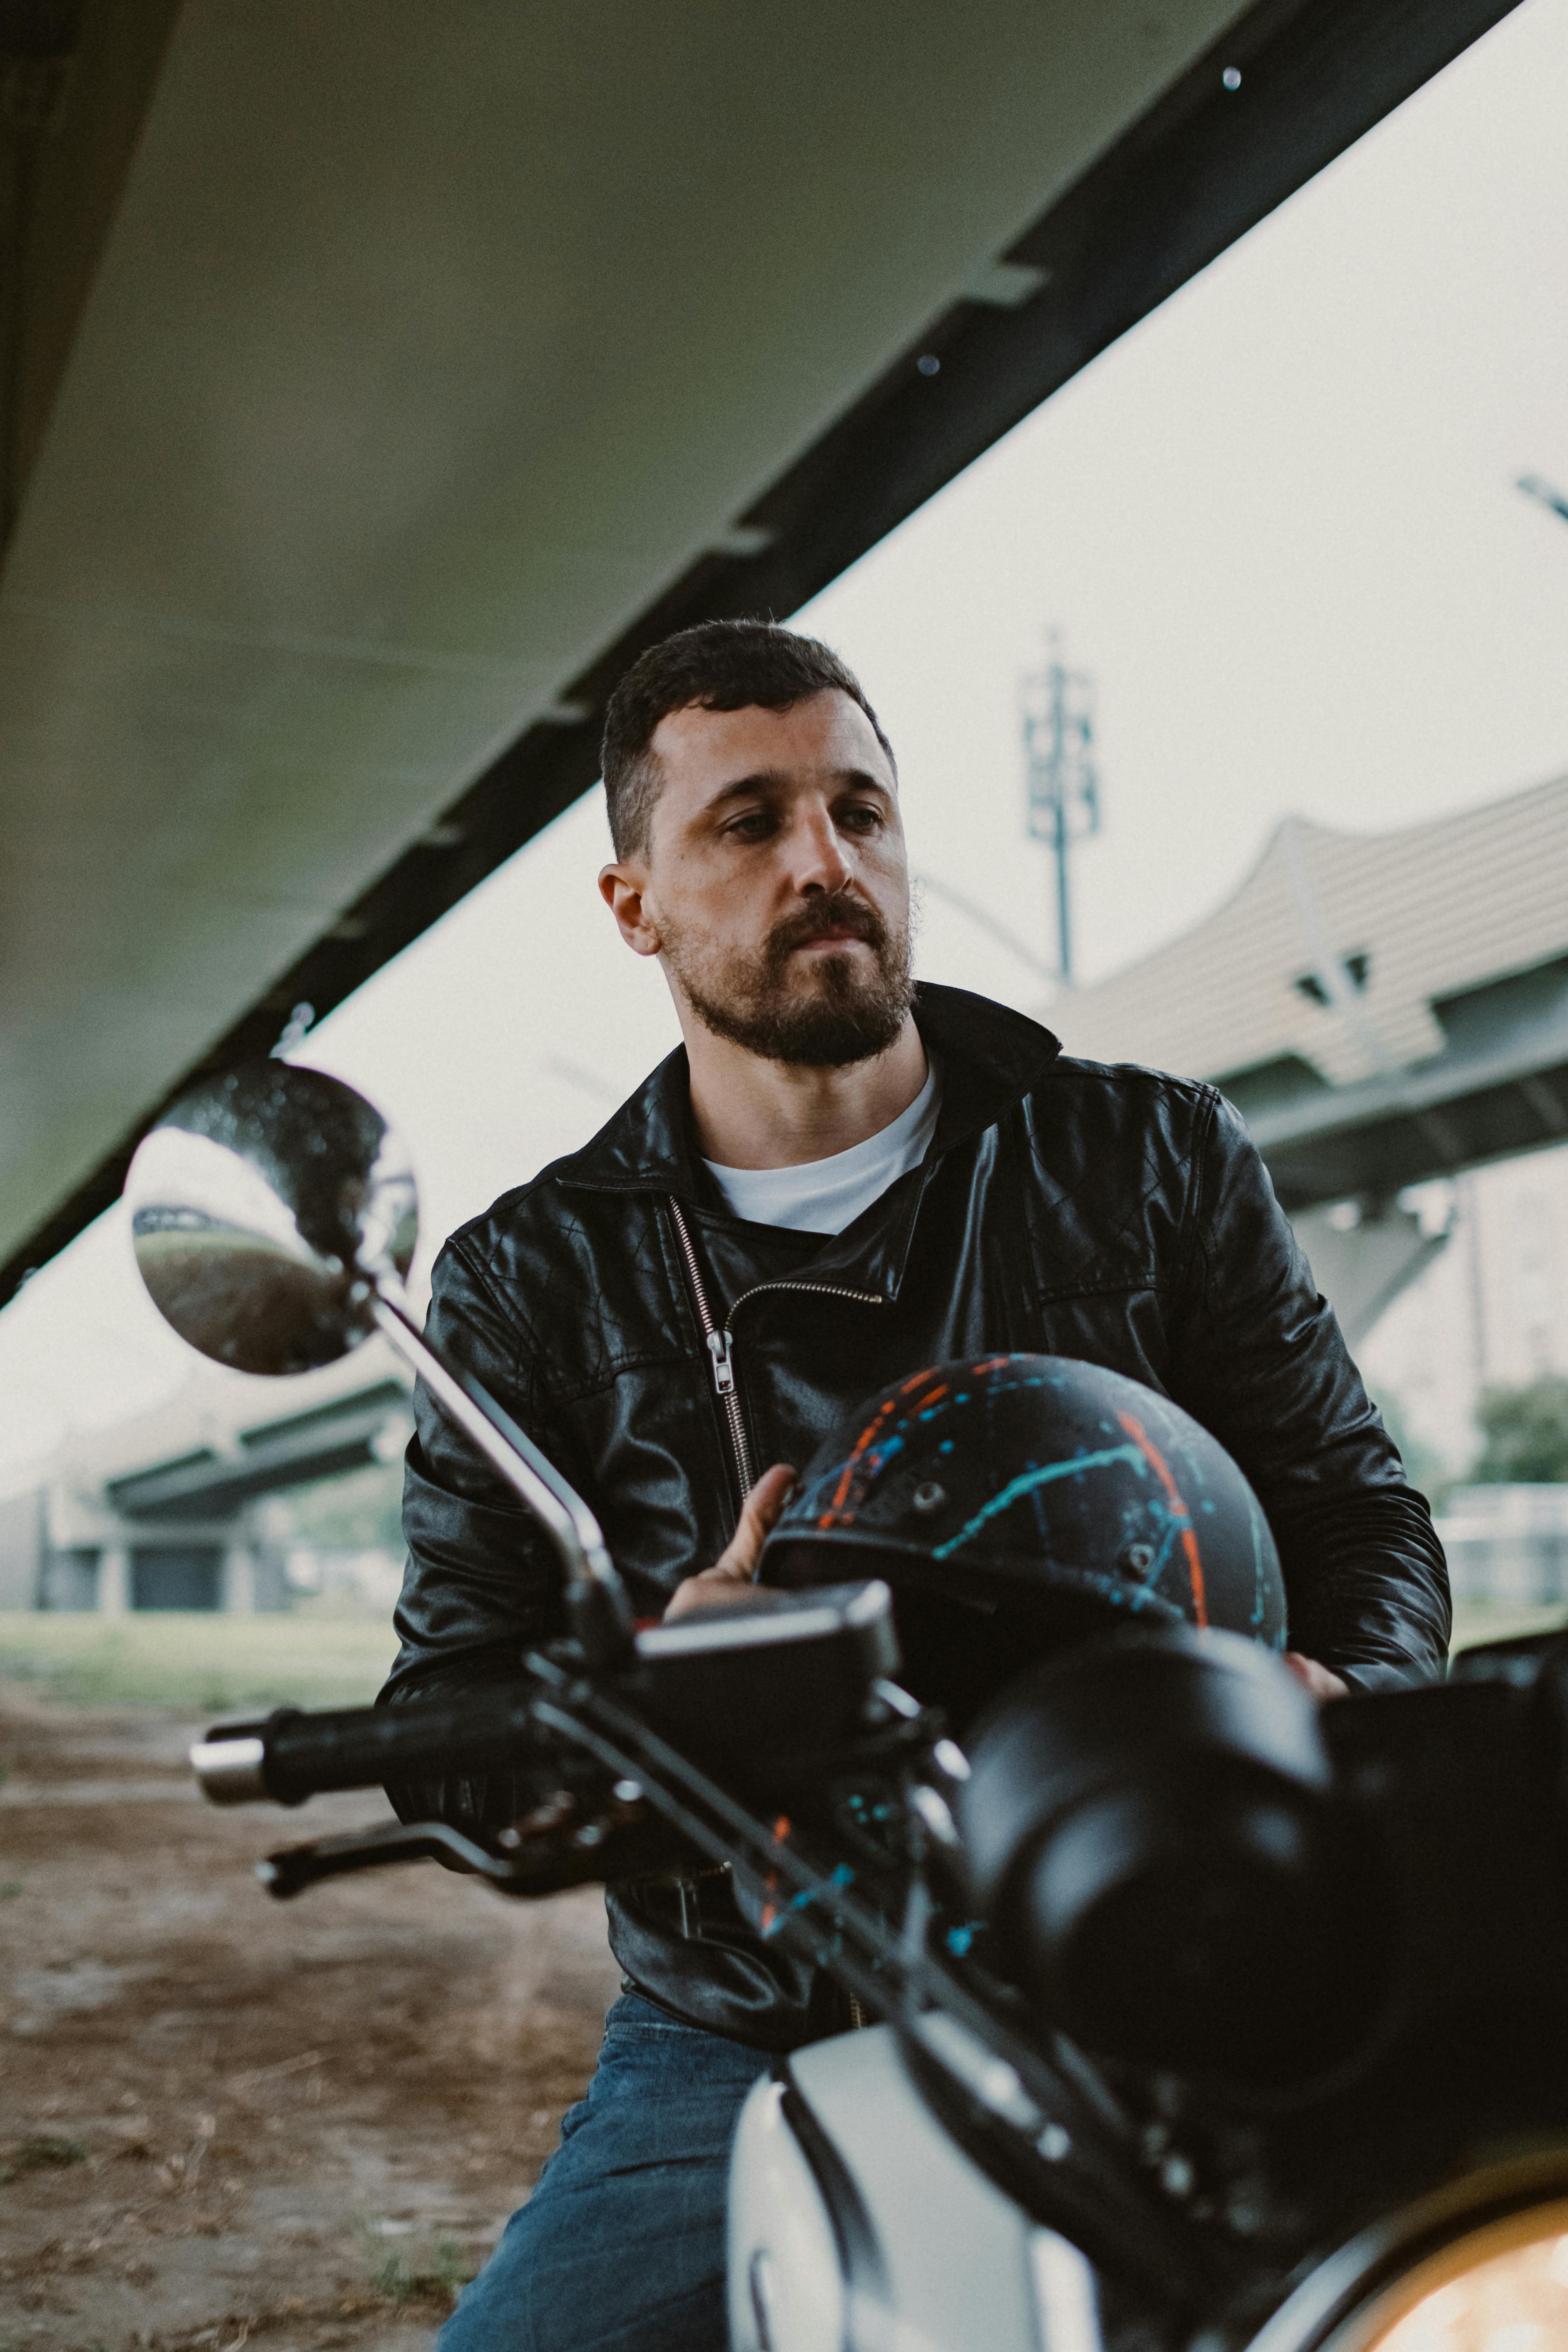 Cool bikers with motorcycle on city street · Free Stock Photo